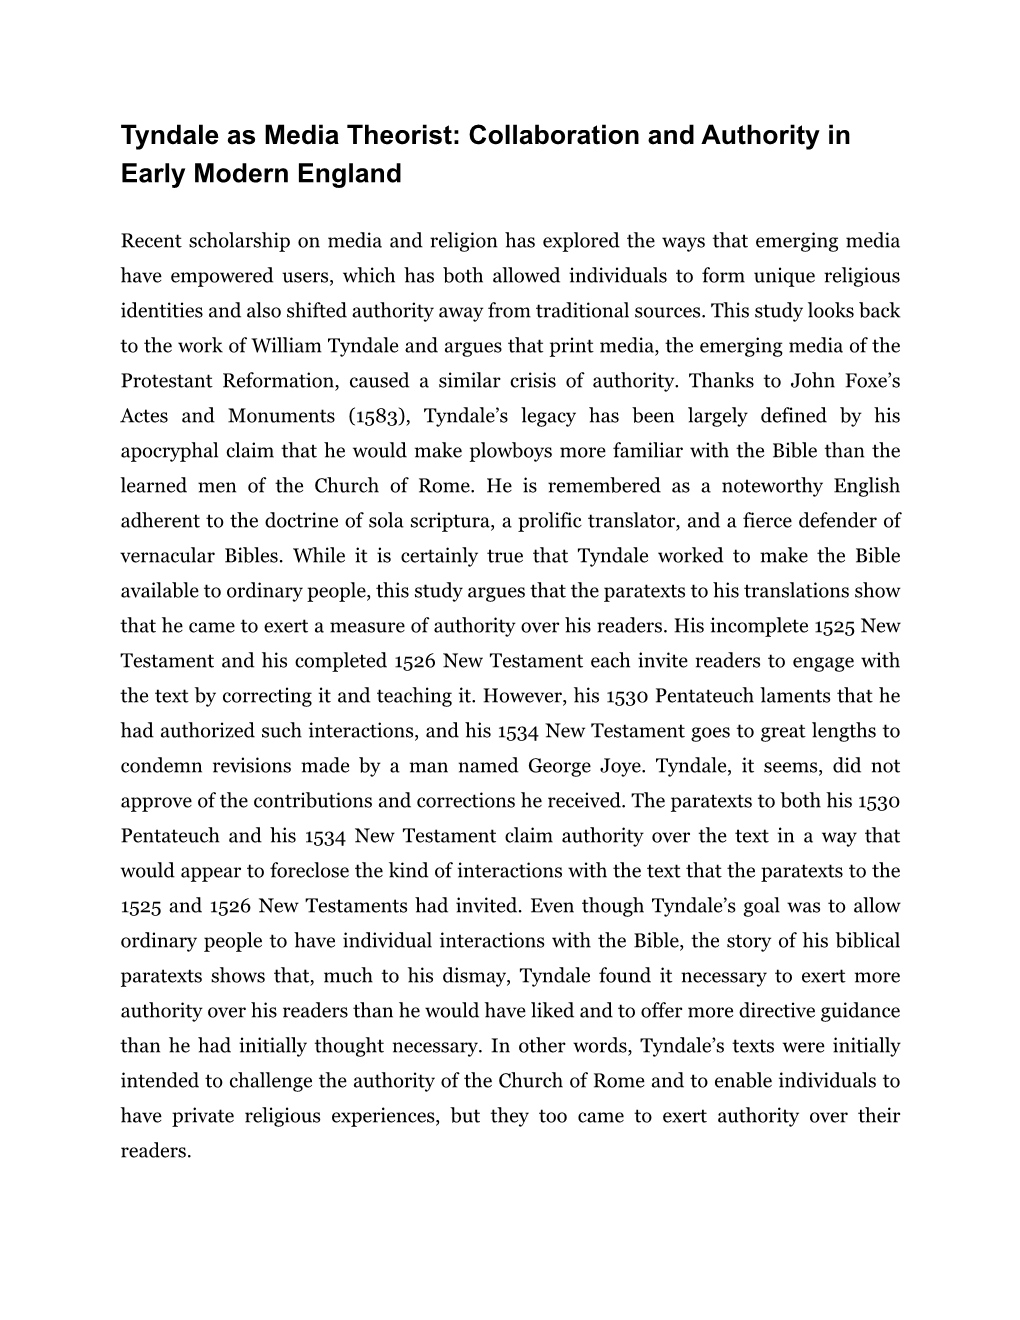 Tyndale As Media Theorist: Collaboration and Authority in Early Modern England